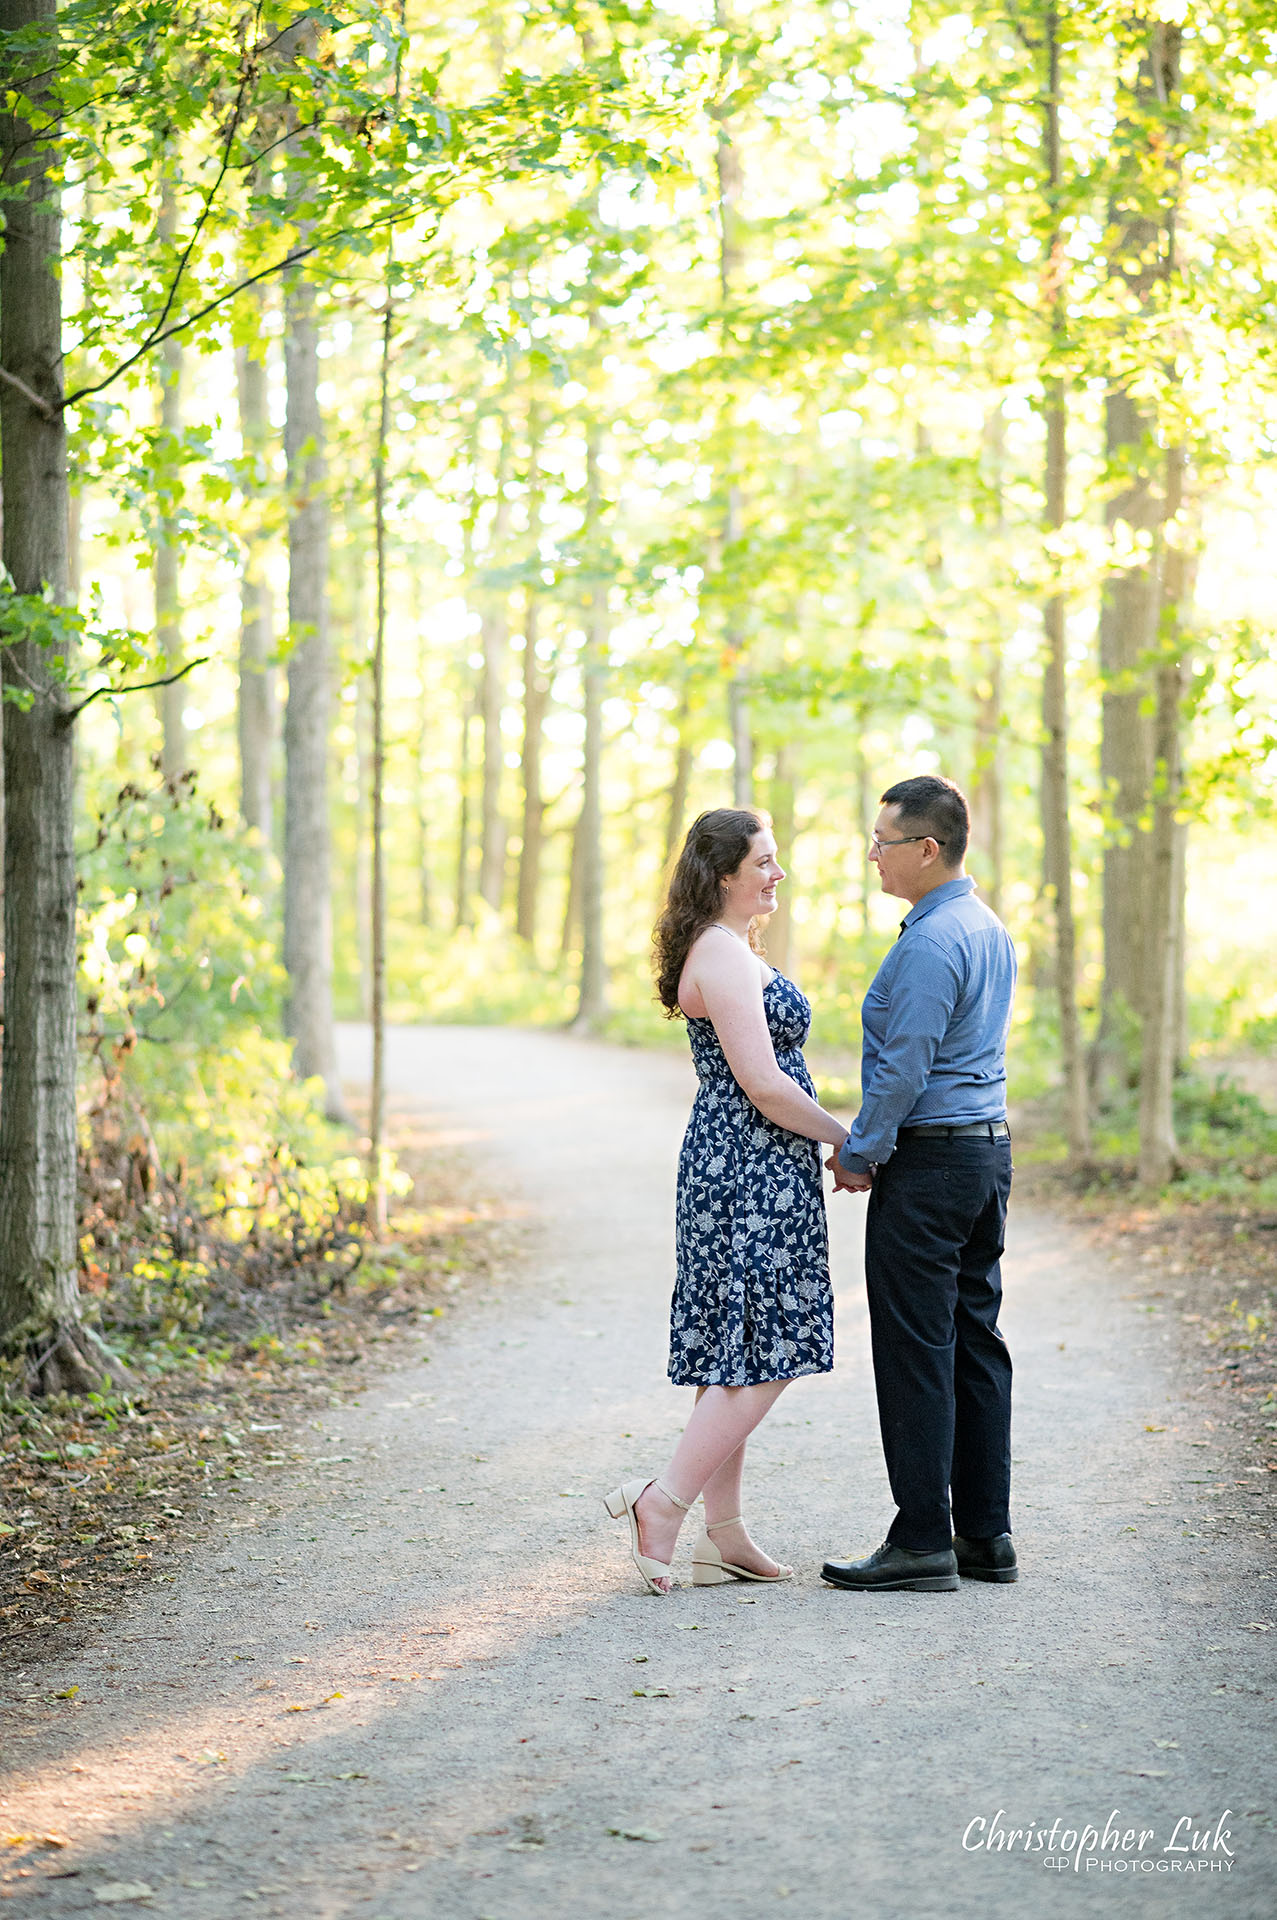 Christopher Luk Toronto Wedding Photographer Markham Forest Engagement Photos Pictures Session Bride Groom Holding Hands Looking At Each Other Candid Natural Organic Photojournalistic Portrait